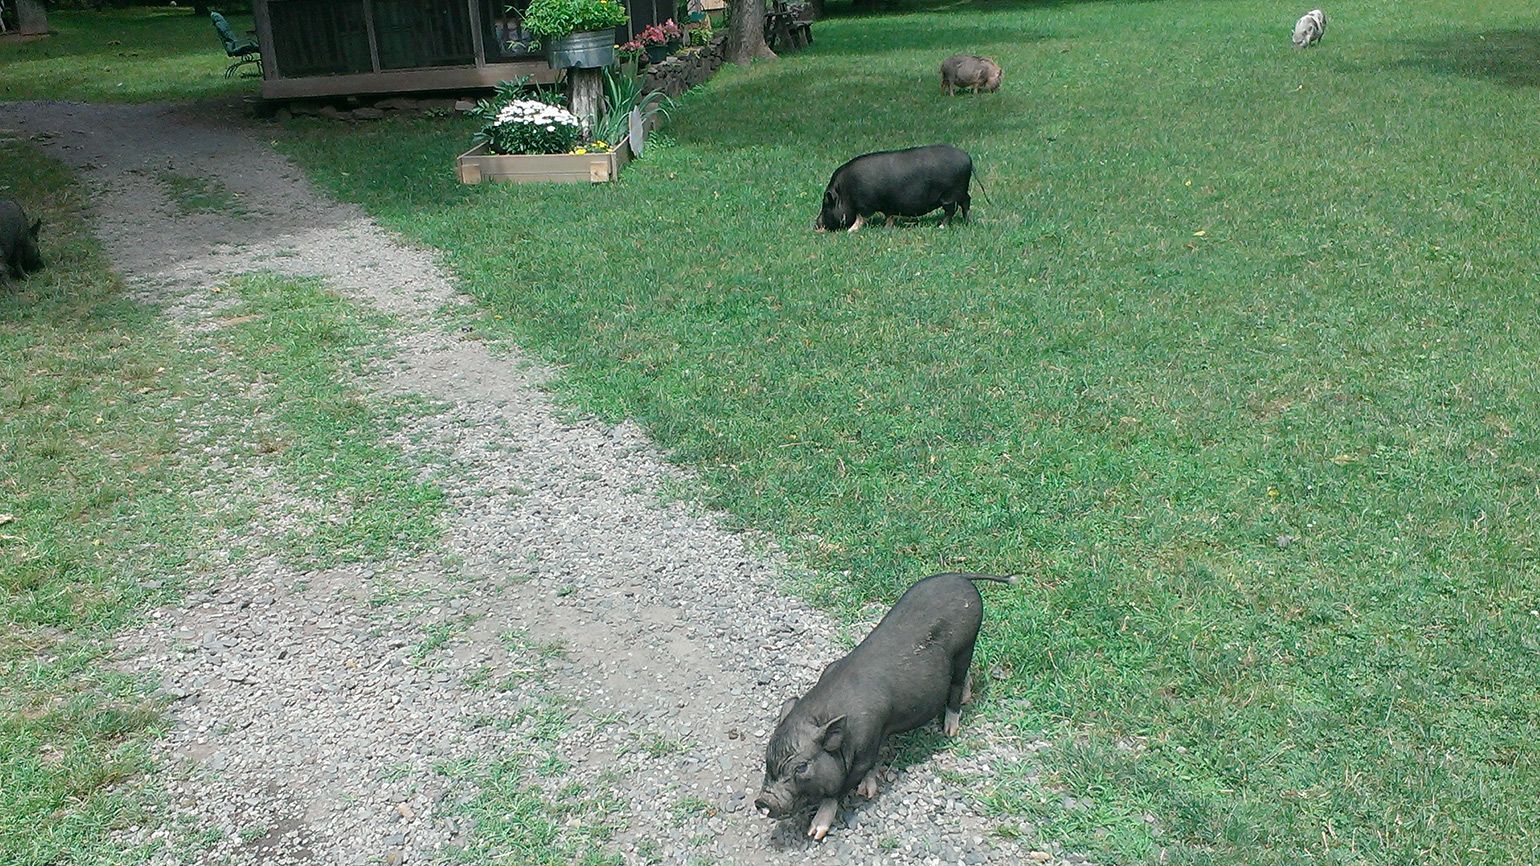 The farm is a pig rescue and sanctuary where the pigs roam free.